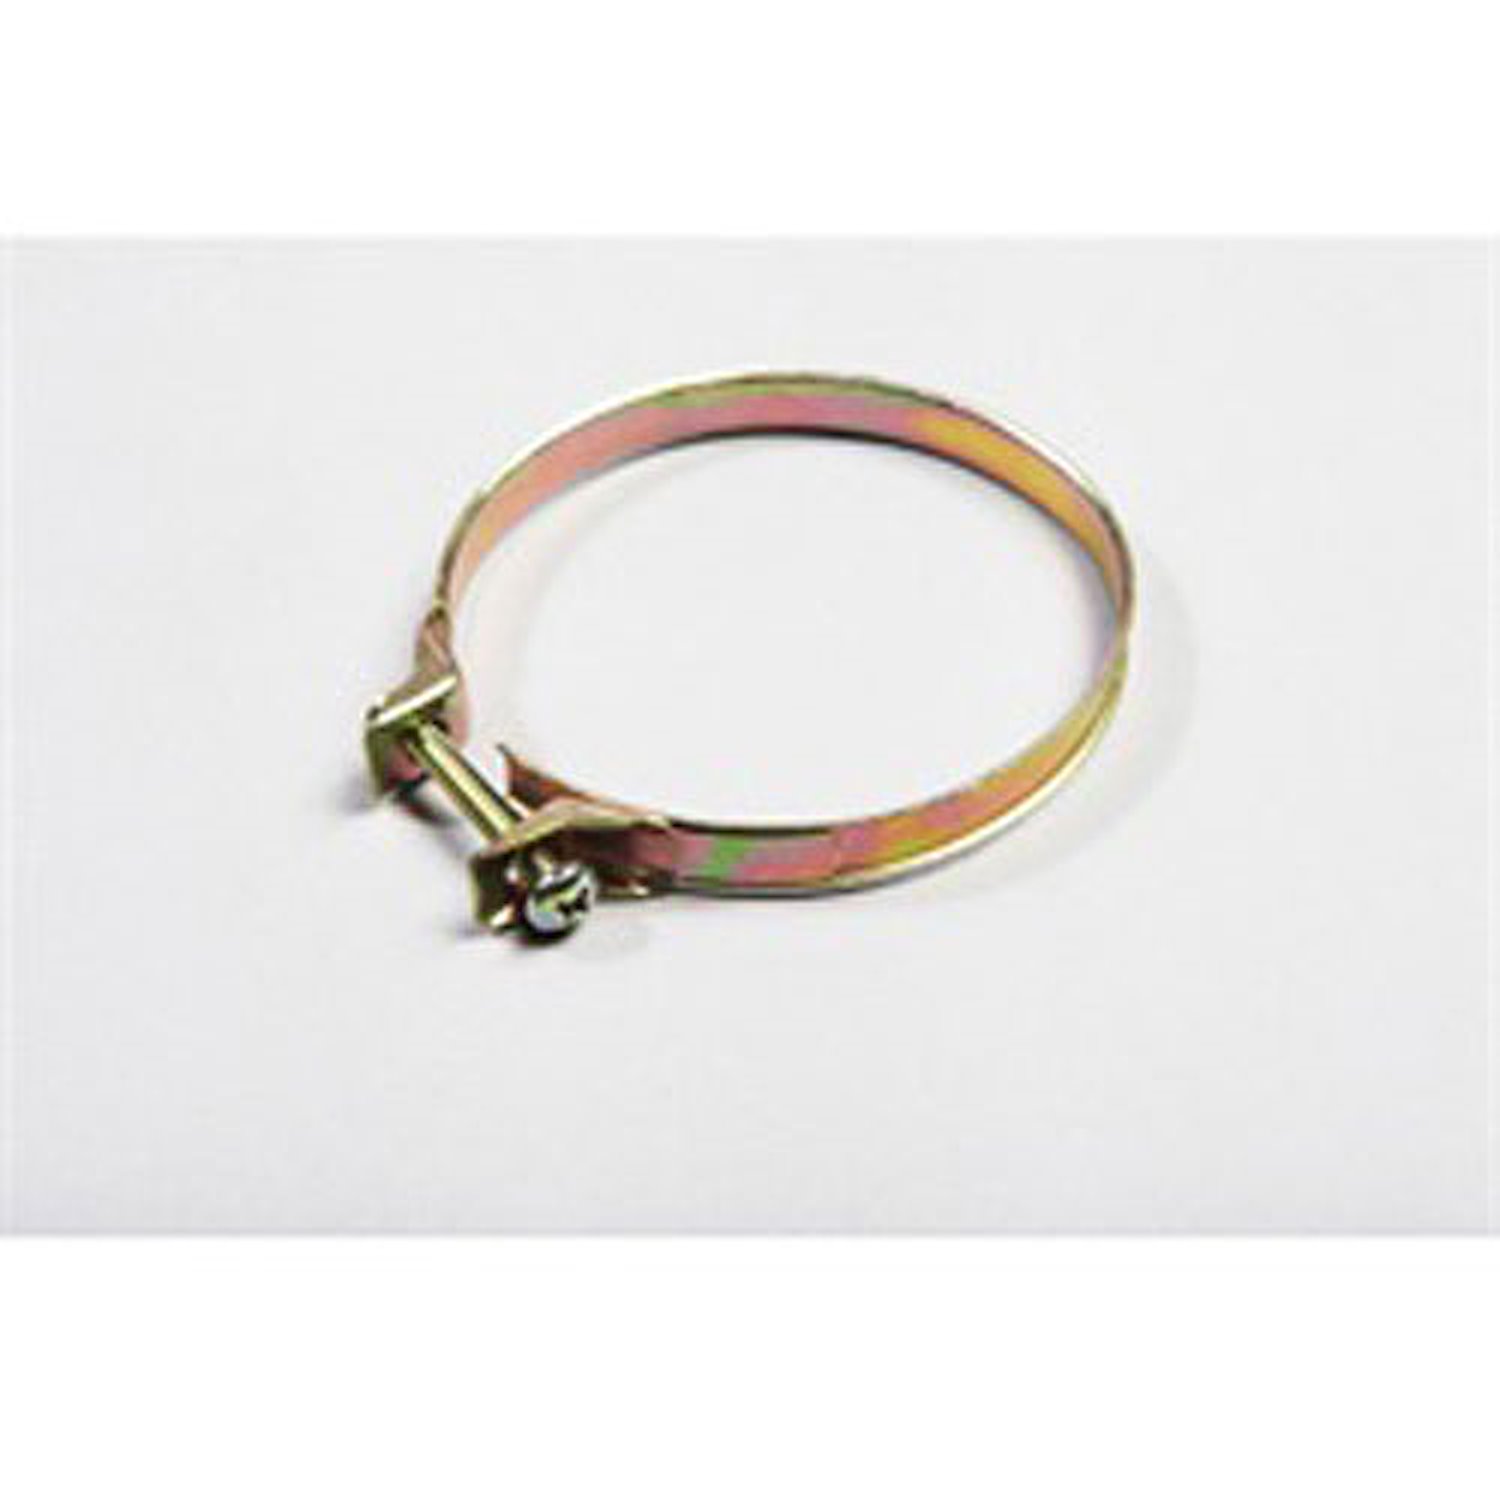 This wire heater hose clamp from Omix-ADA fits 57-71 Willys CJ models pickups and station wagons.